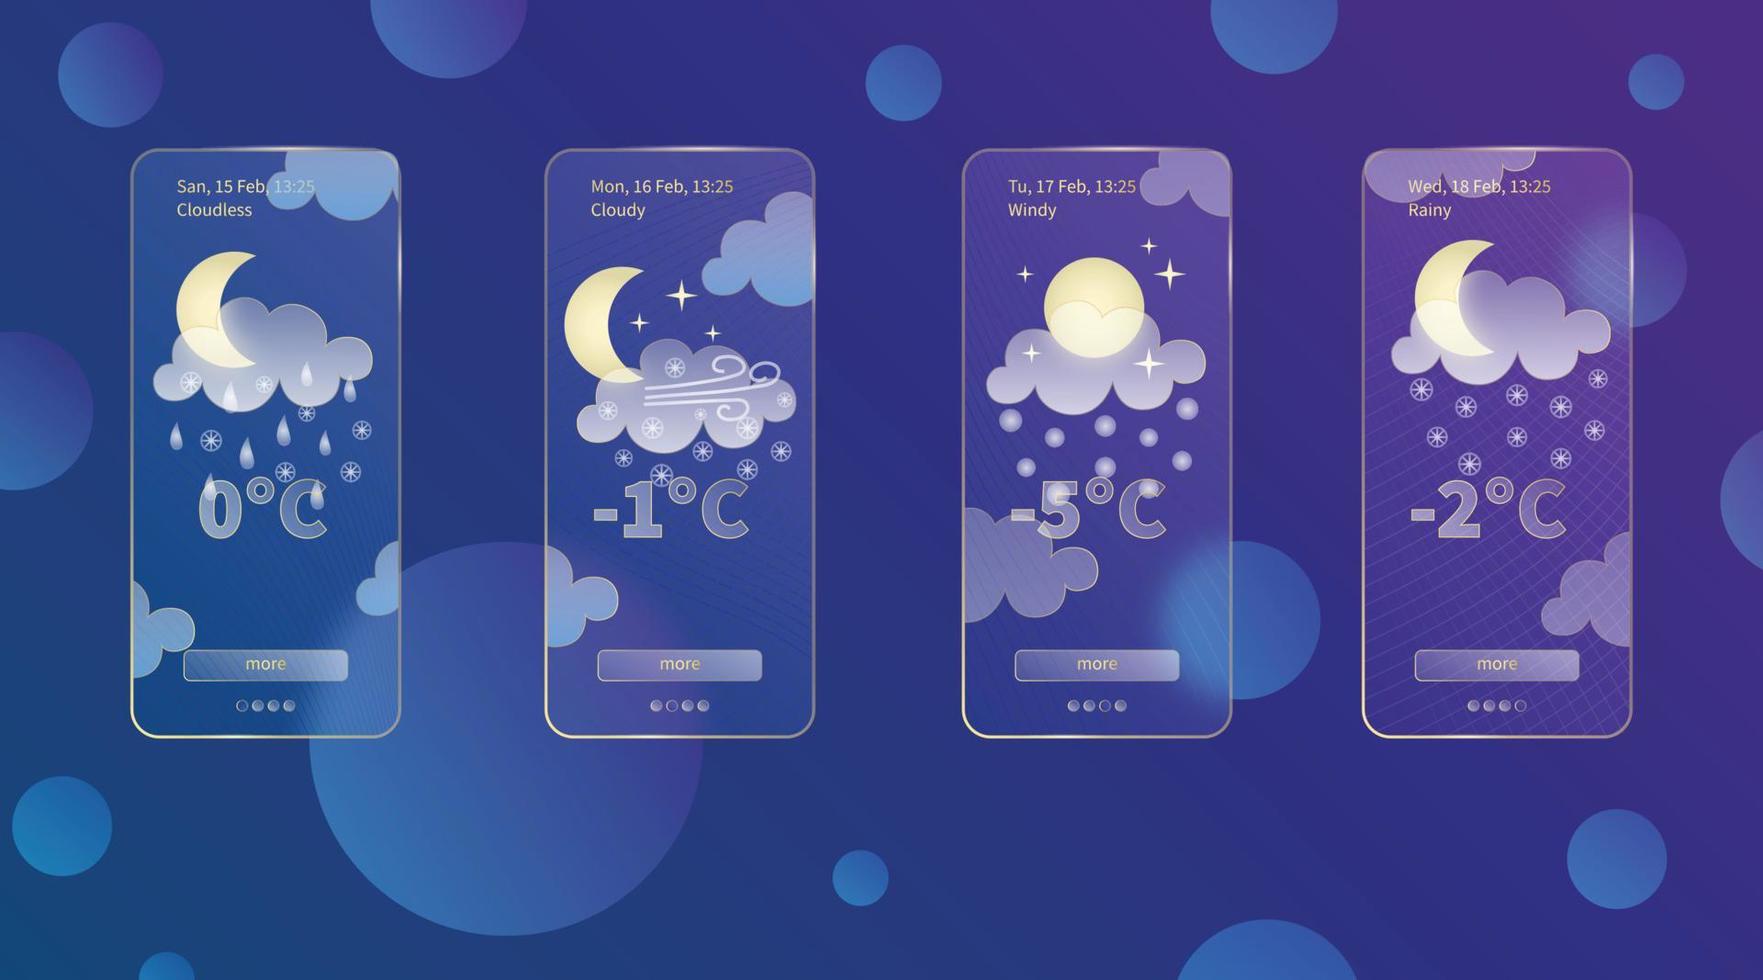 Set of 3d glassmorphism weather forecast app template Interface design kit. Night meteo icons on dark blue gradient background Season collections smartphone glass morphism screens Vector illustrations